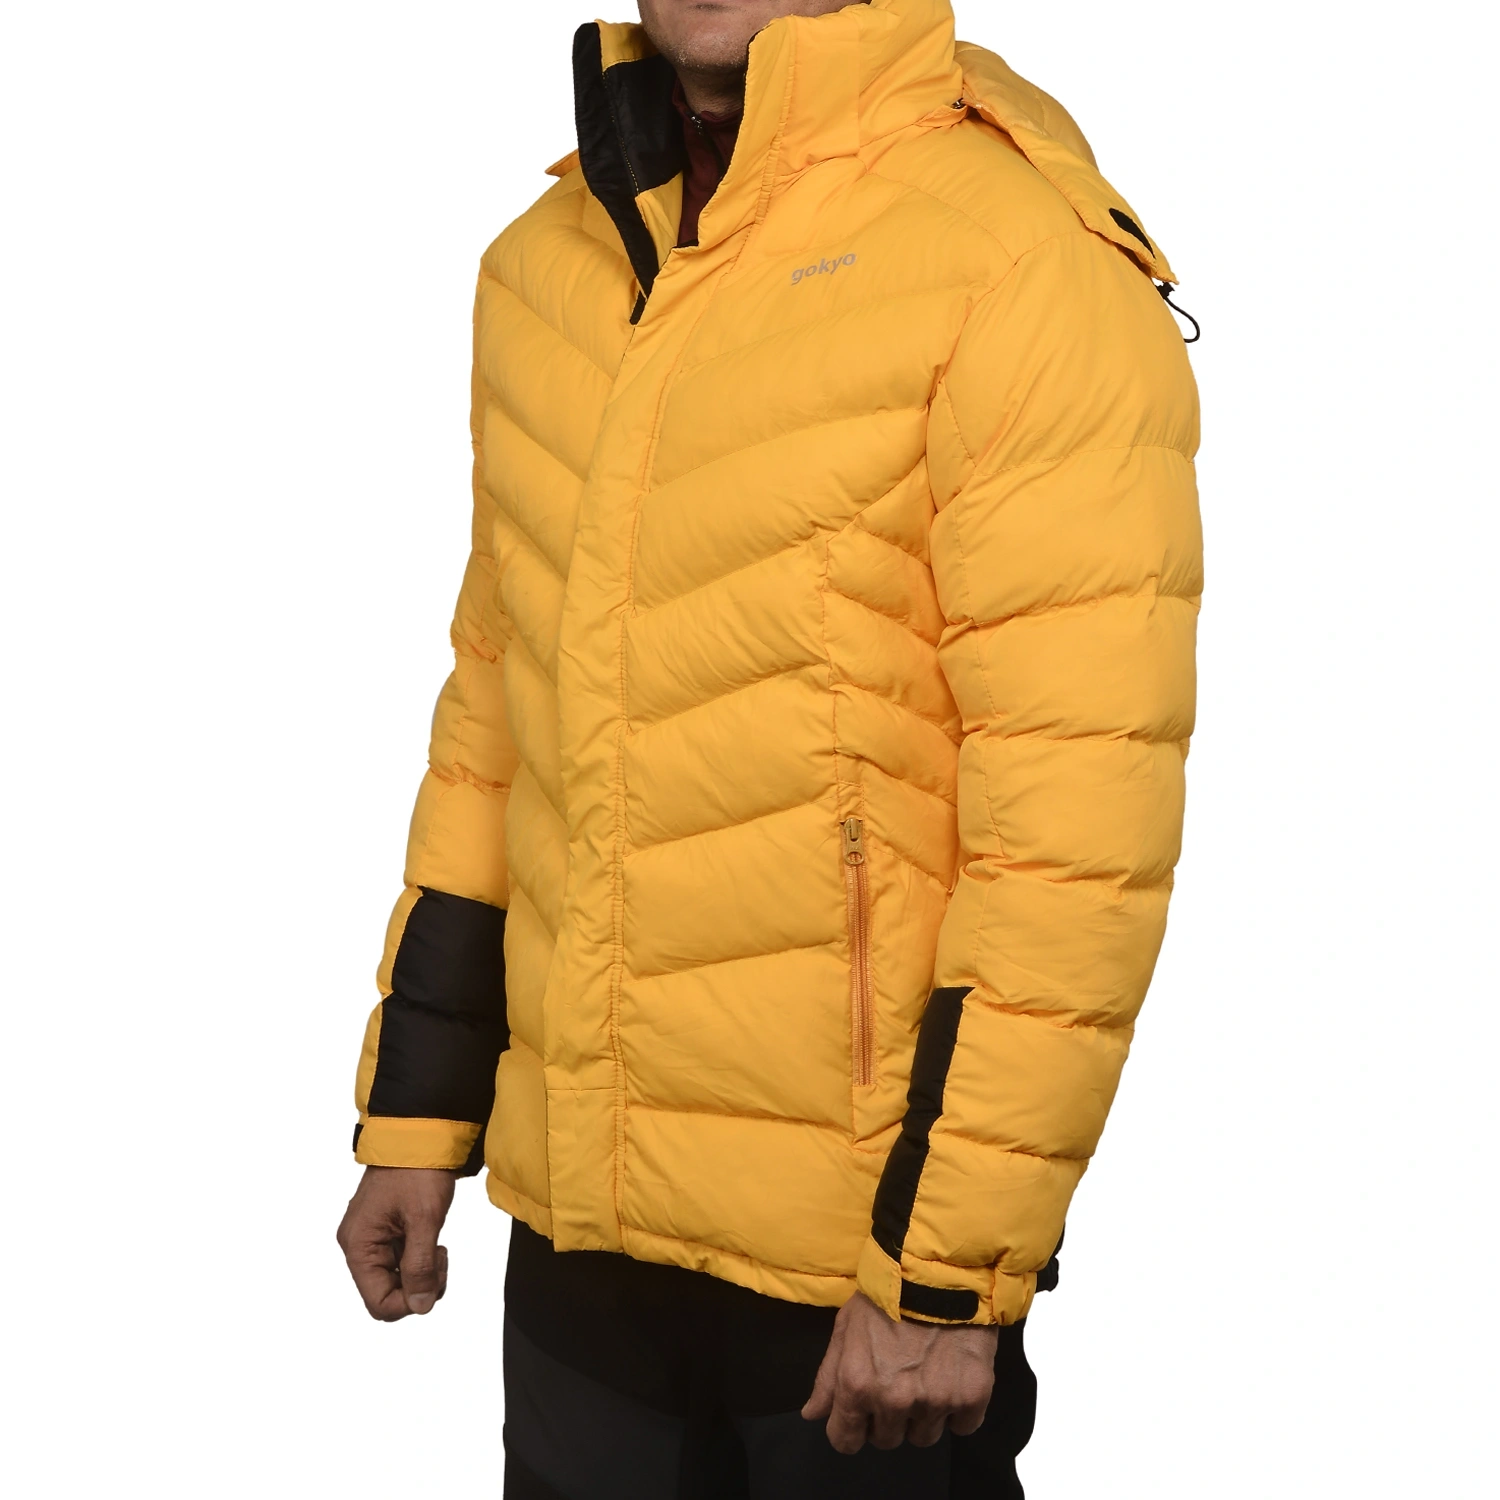 K2 Survivor Down Jacket for Men: Stylized Functionality for Extreme Cold Weather Expeditions (Up to -20°C)-XXL-Yellow-2